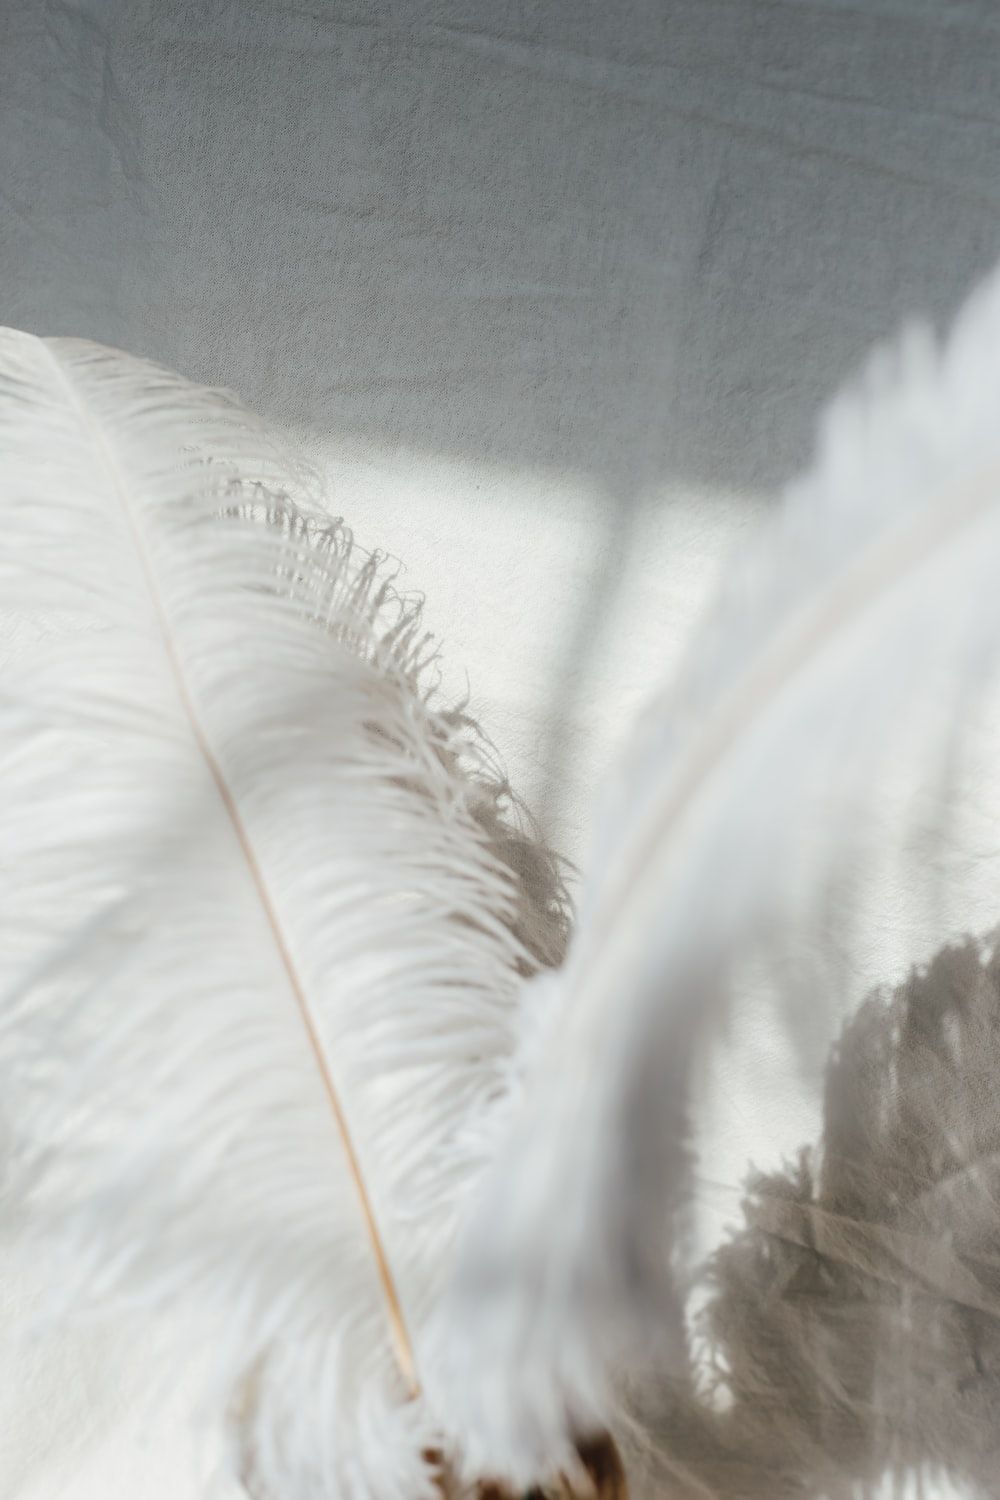 A white feather on a white surface with sunlight shining on it. - Feathers